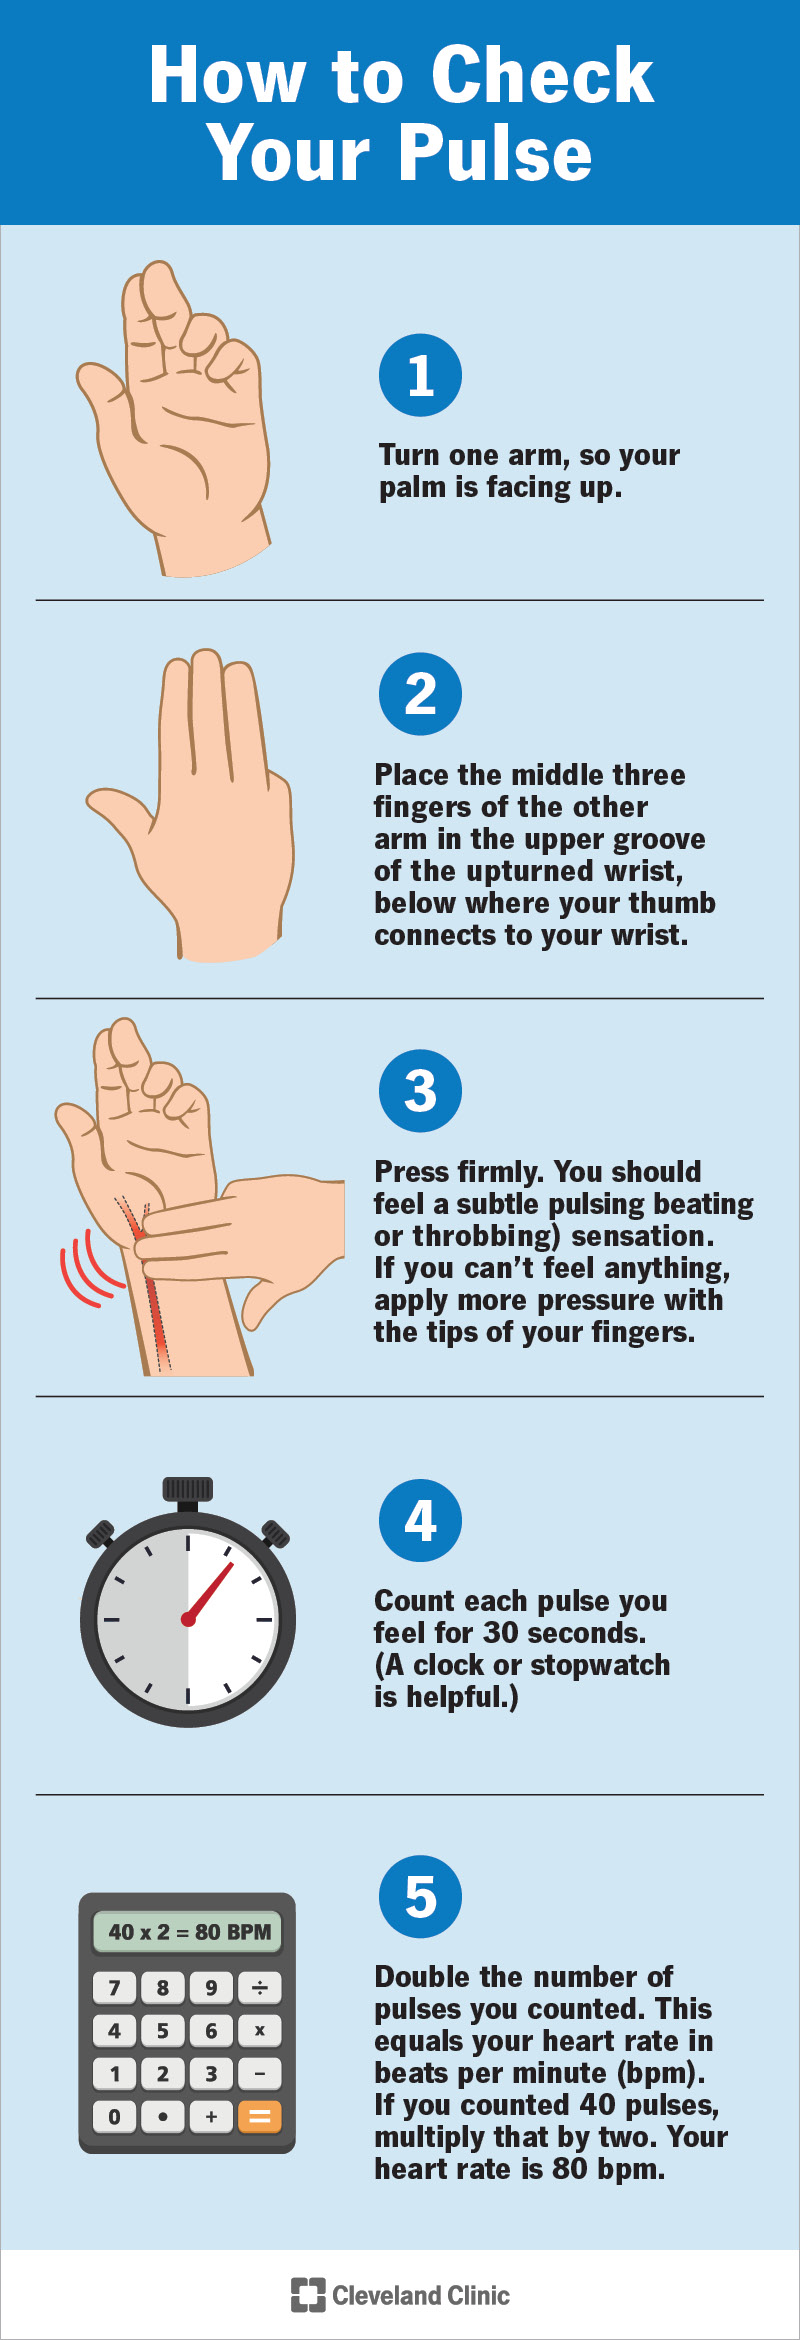 How to check your pulse in five steps.